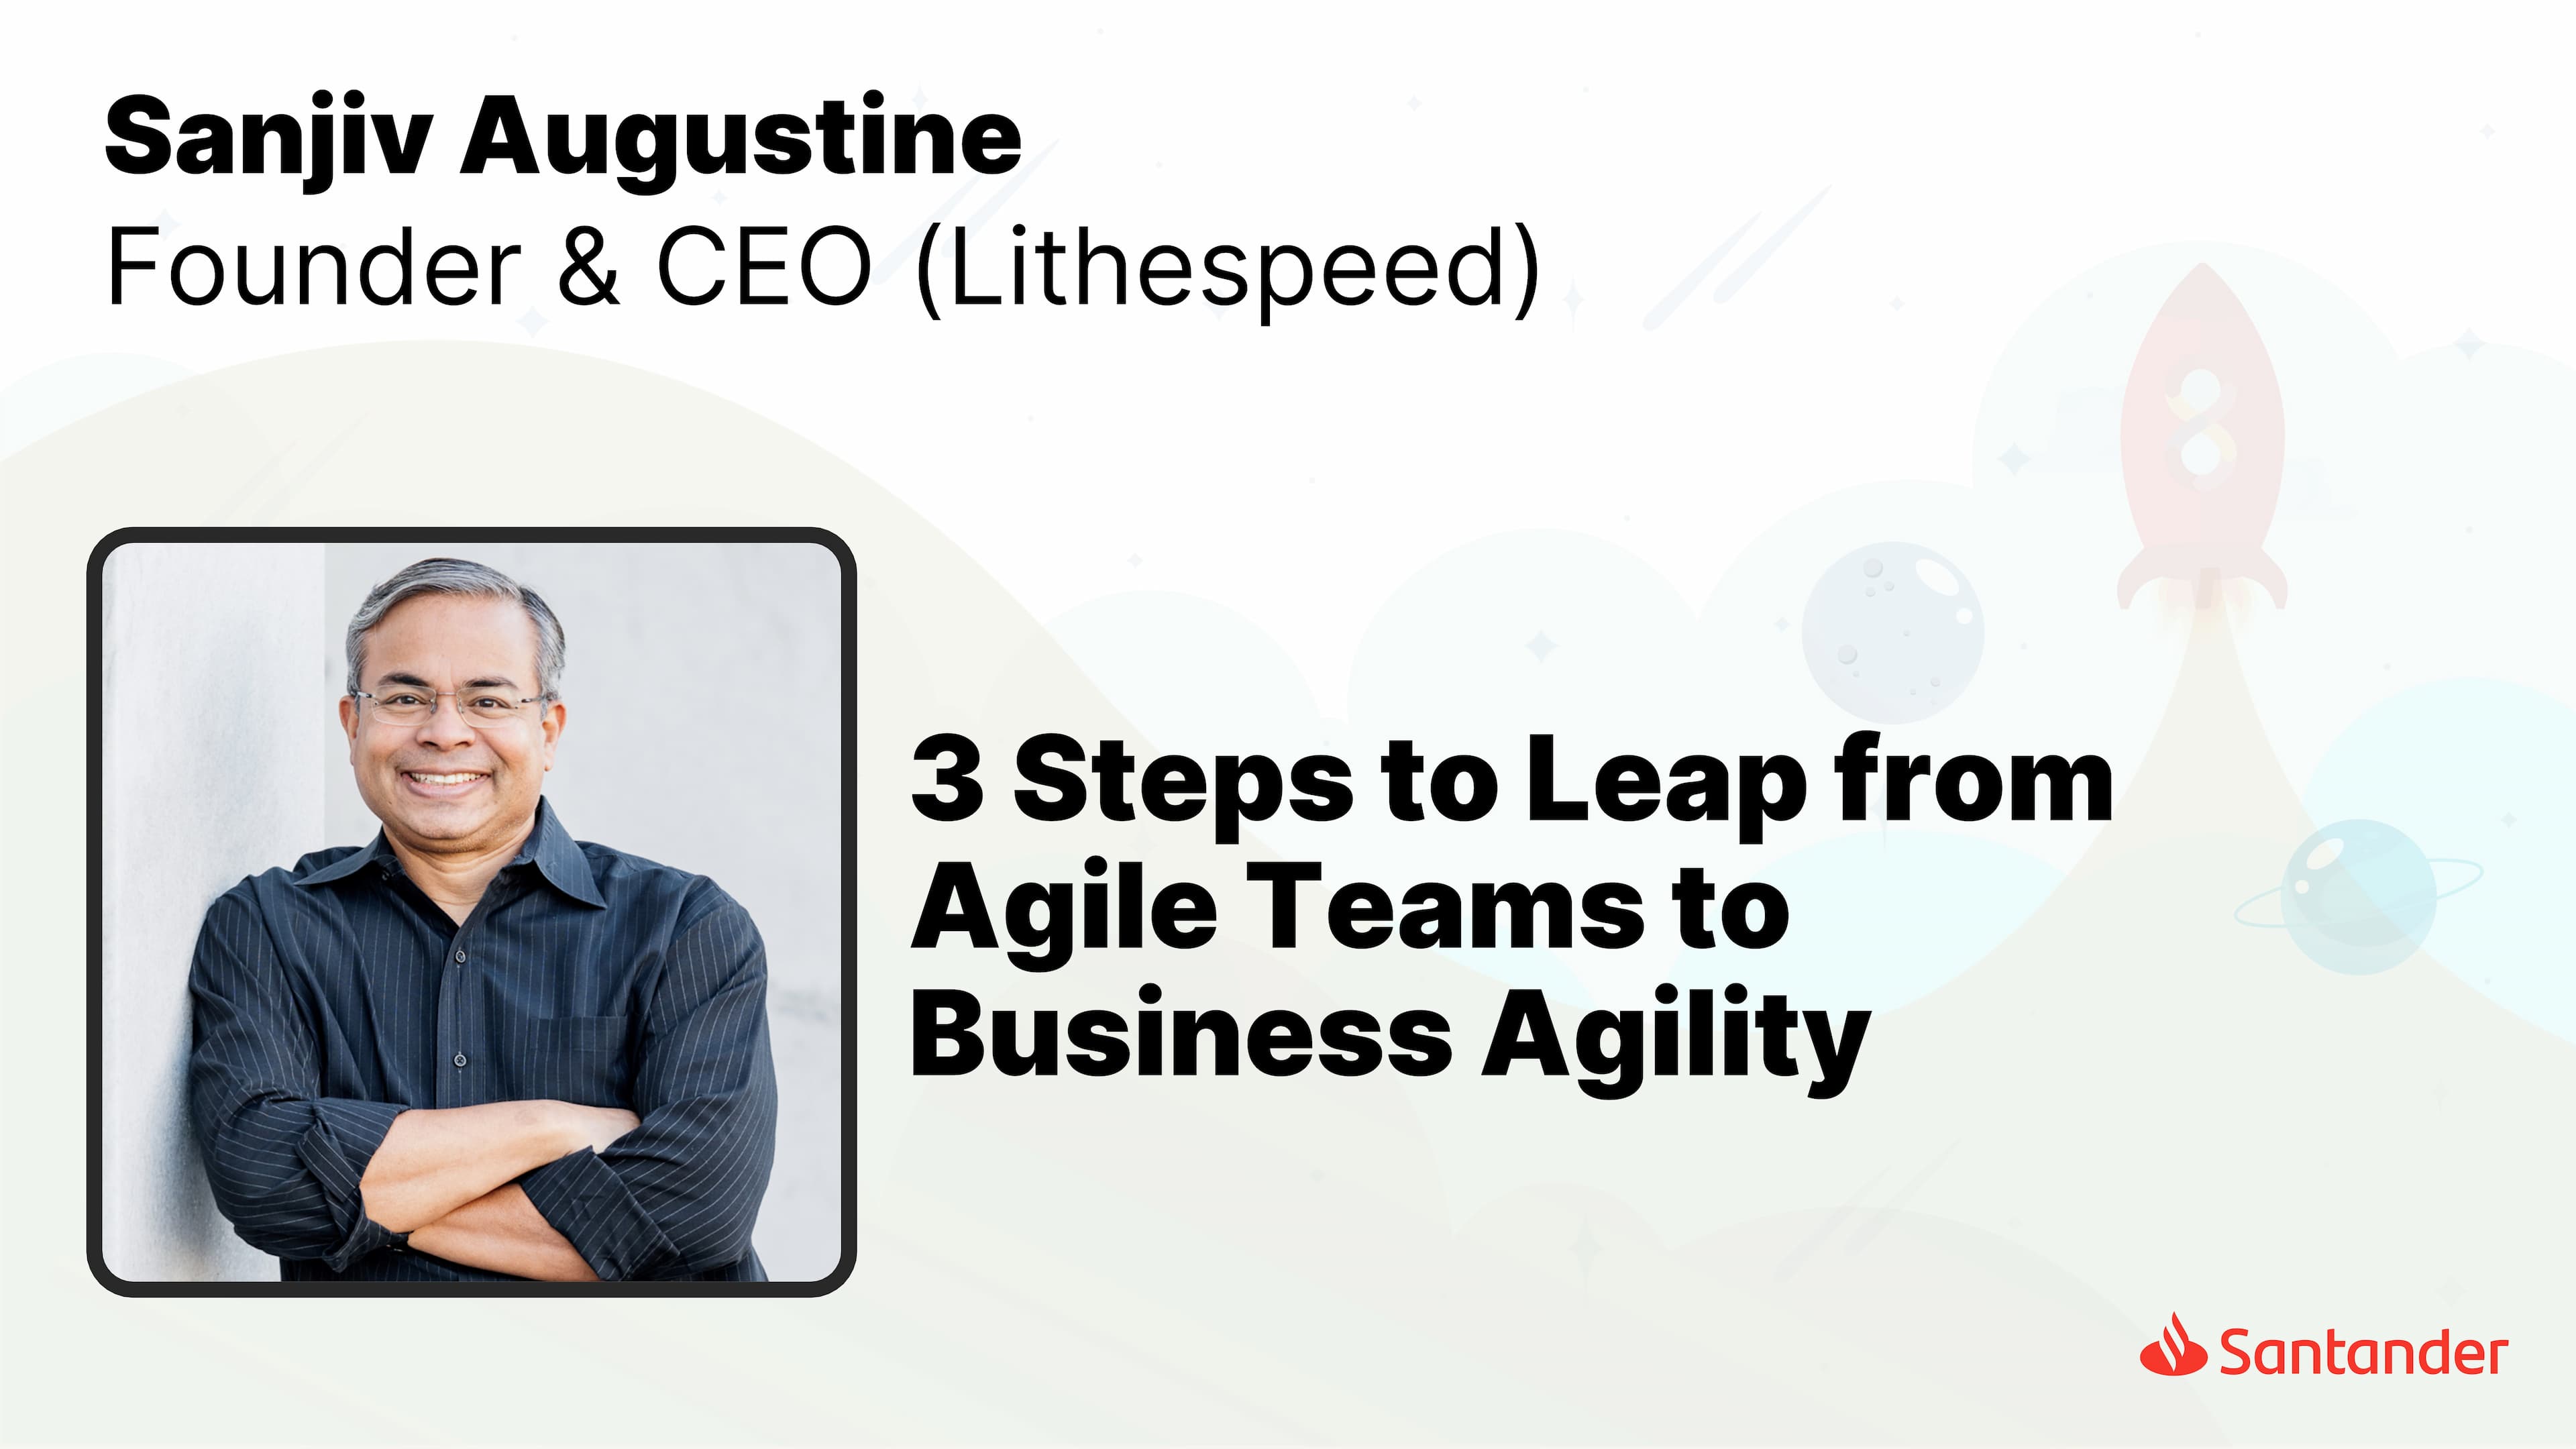 3 Steps to Leap from Agile Teams to Business Agility